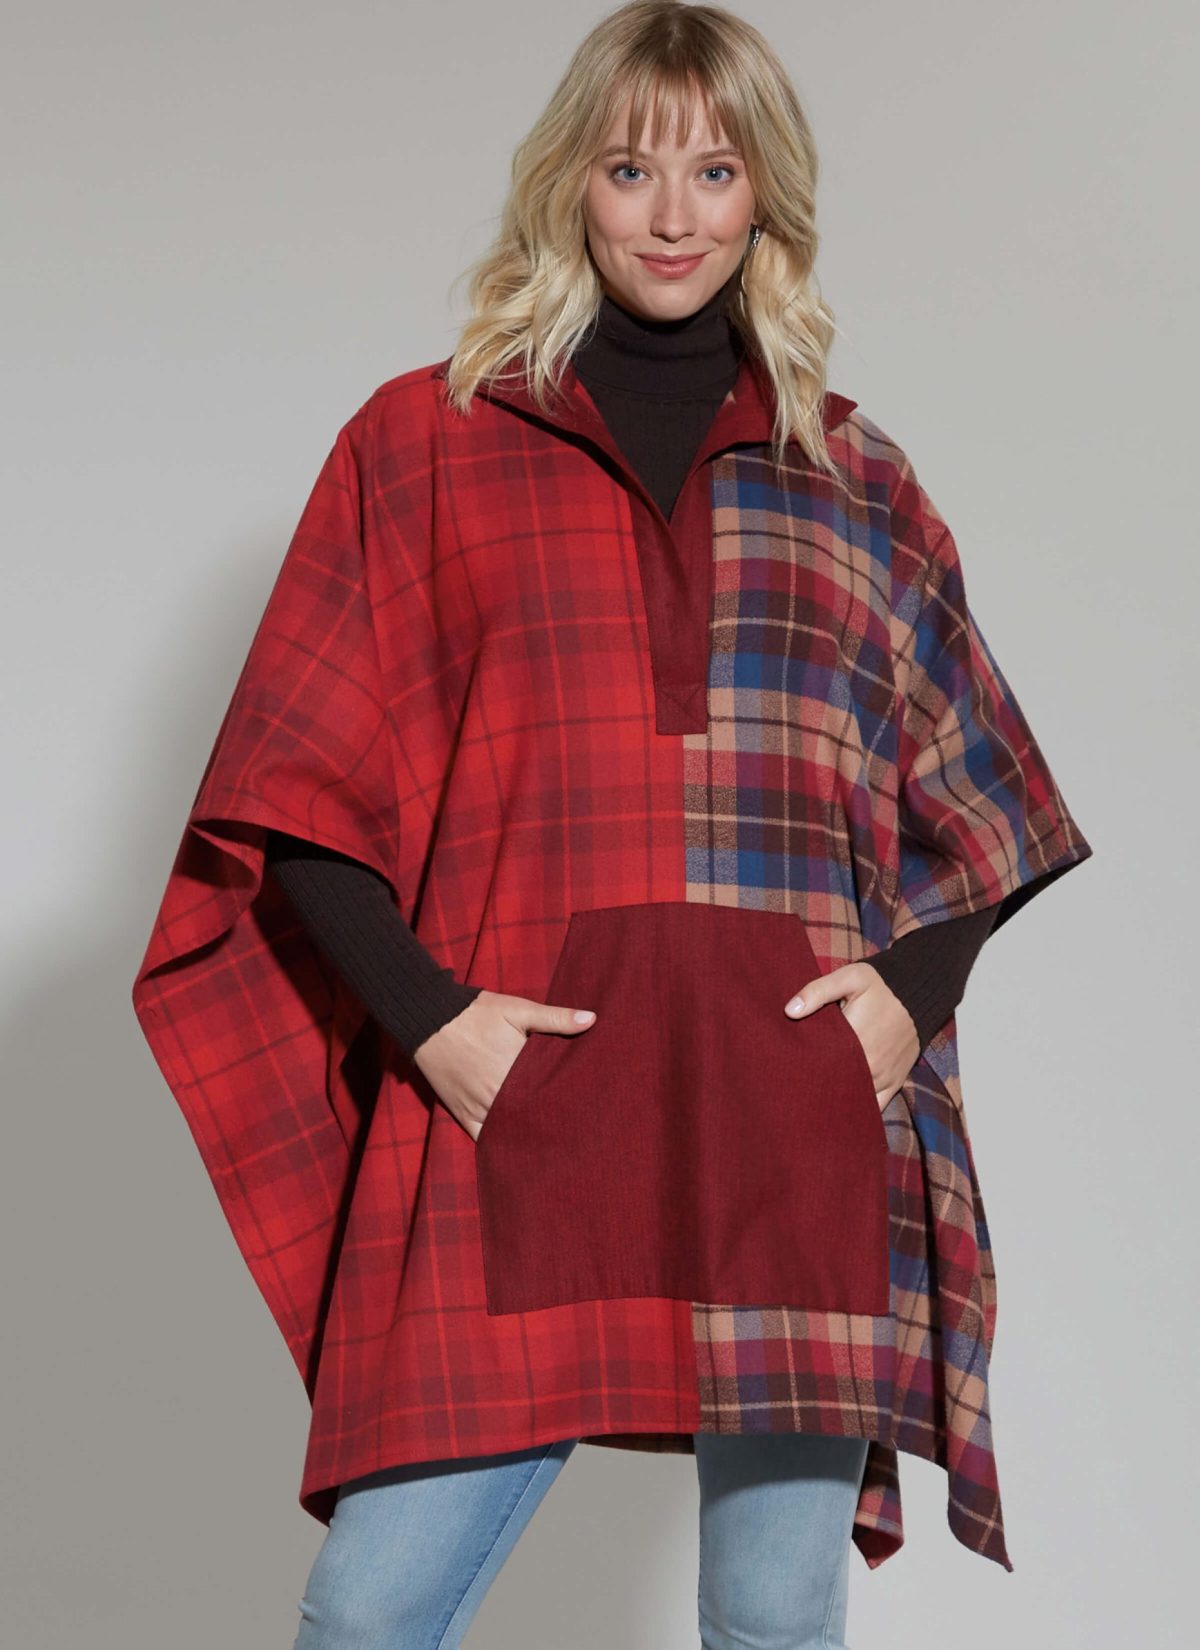 McCall's Sewing Pattern M8347 Misses' Poncho